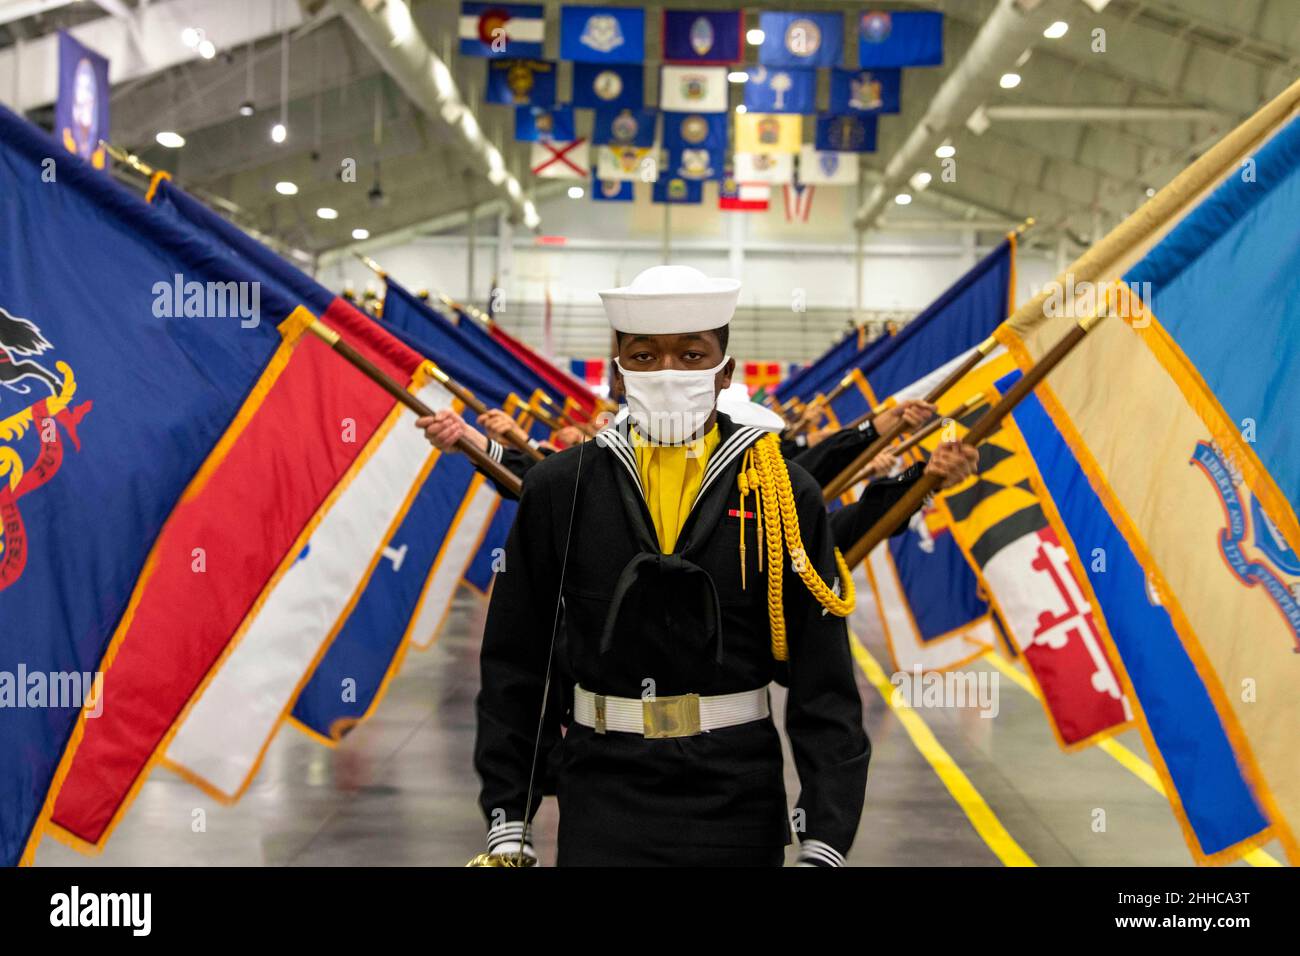 Great Lakes, llinois, USA. 14th Jan, 2022. Sailors graduating from boot camp march in Midway Ceremonial Drill Hall during a pass-in-review graduation ceremony at Recruit Training Command. More than 40,000 recruits train annually at the Navy's only boot camp. Credit: U.S. Navy/ZUMA Press Wire Service/ZUMAPRESS.com/Alamy Live News Stock Photo